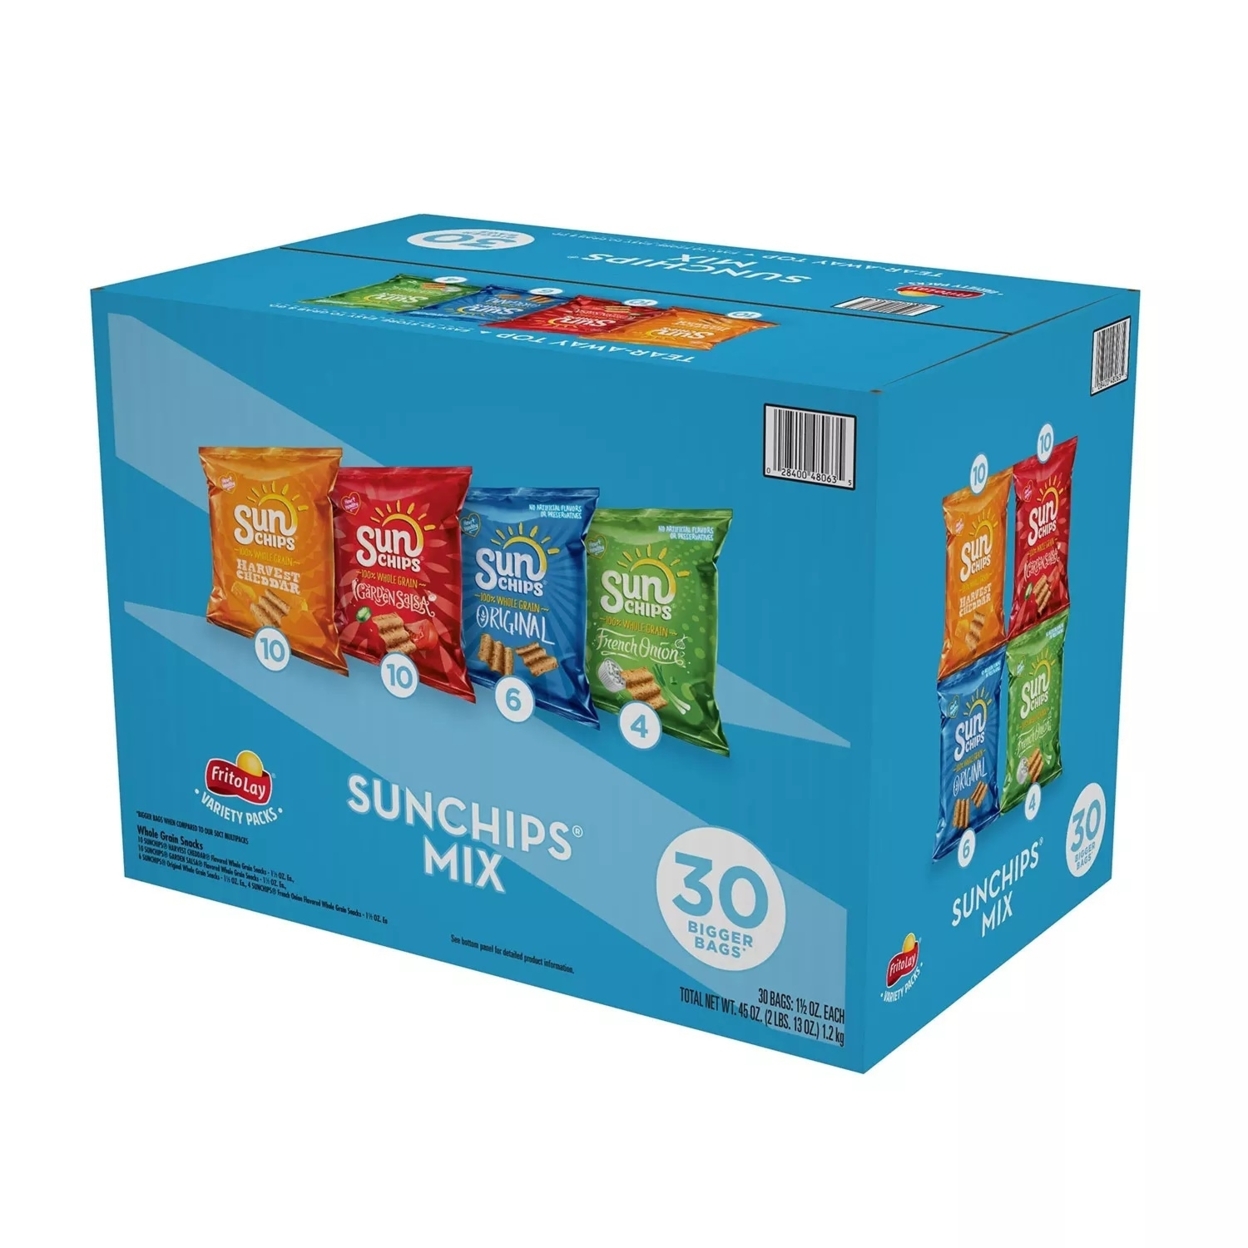 SunChips Mix Variety Pack (30 Count)